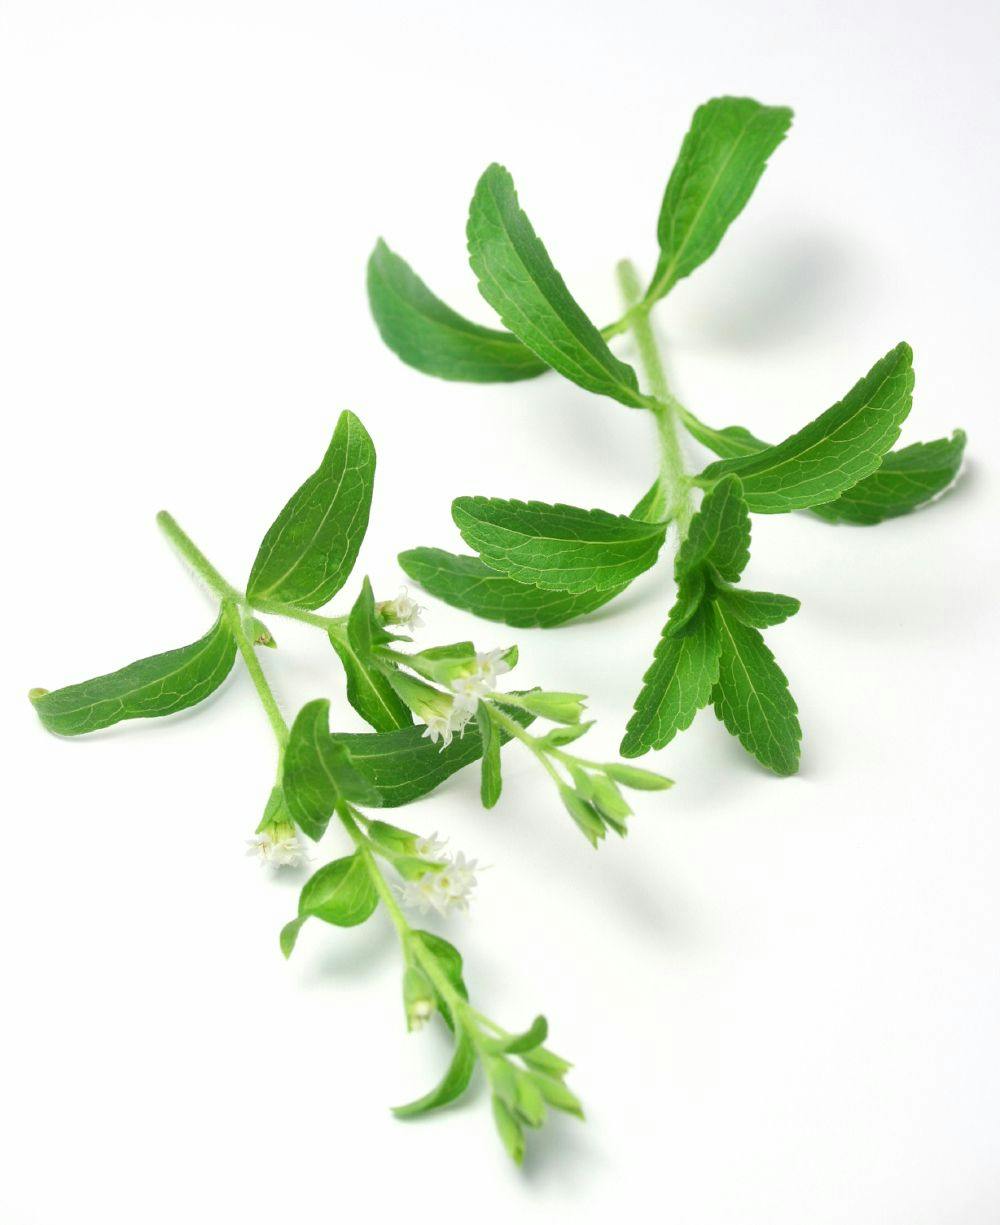 Stevia supplier Howtian says it achieved a 12% average Reb A yield this season, an industry milestone